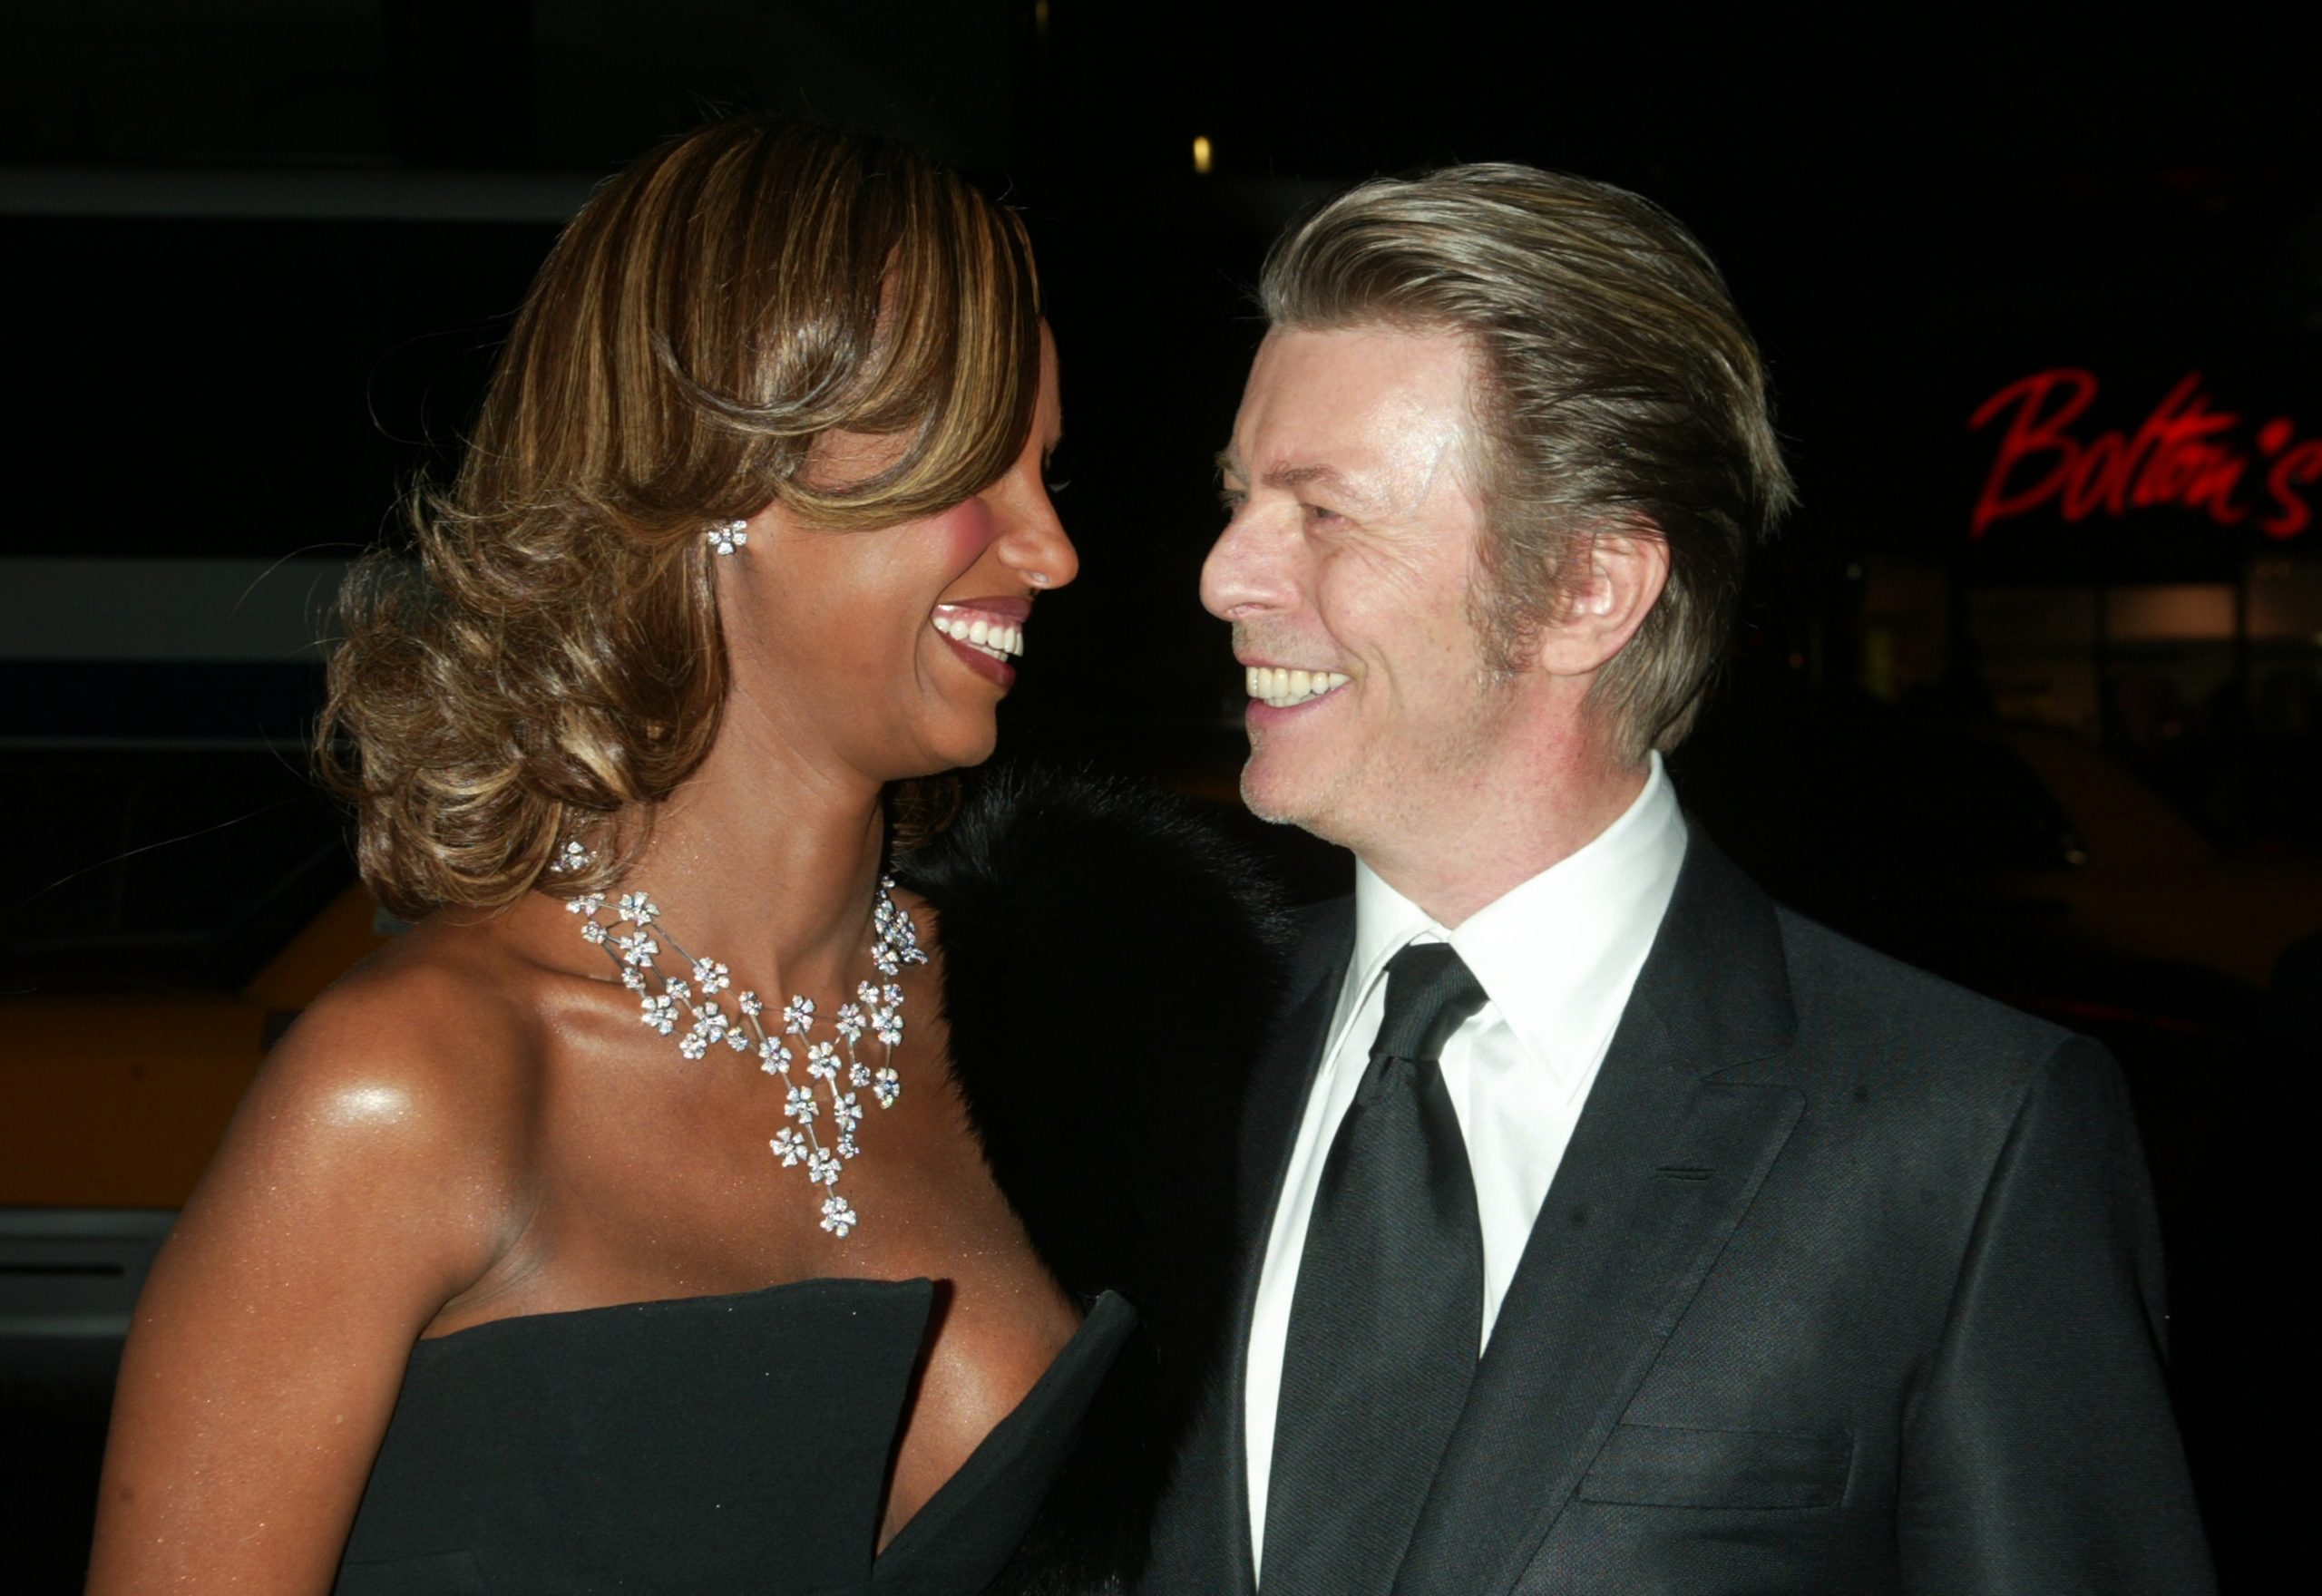 David Bowie’s First Gift to His Wife Iman Was an Hermès Birkin Bag — And He Got Sandals For Himself